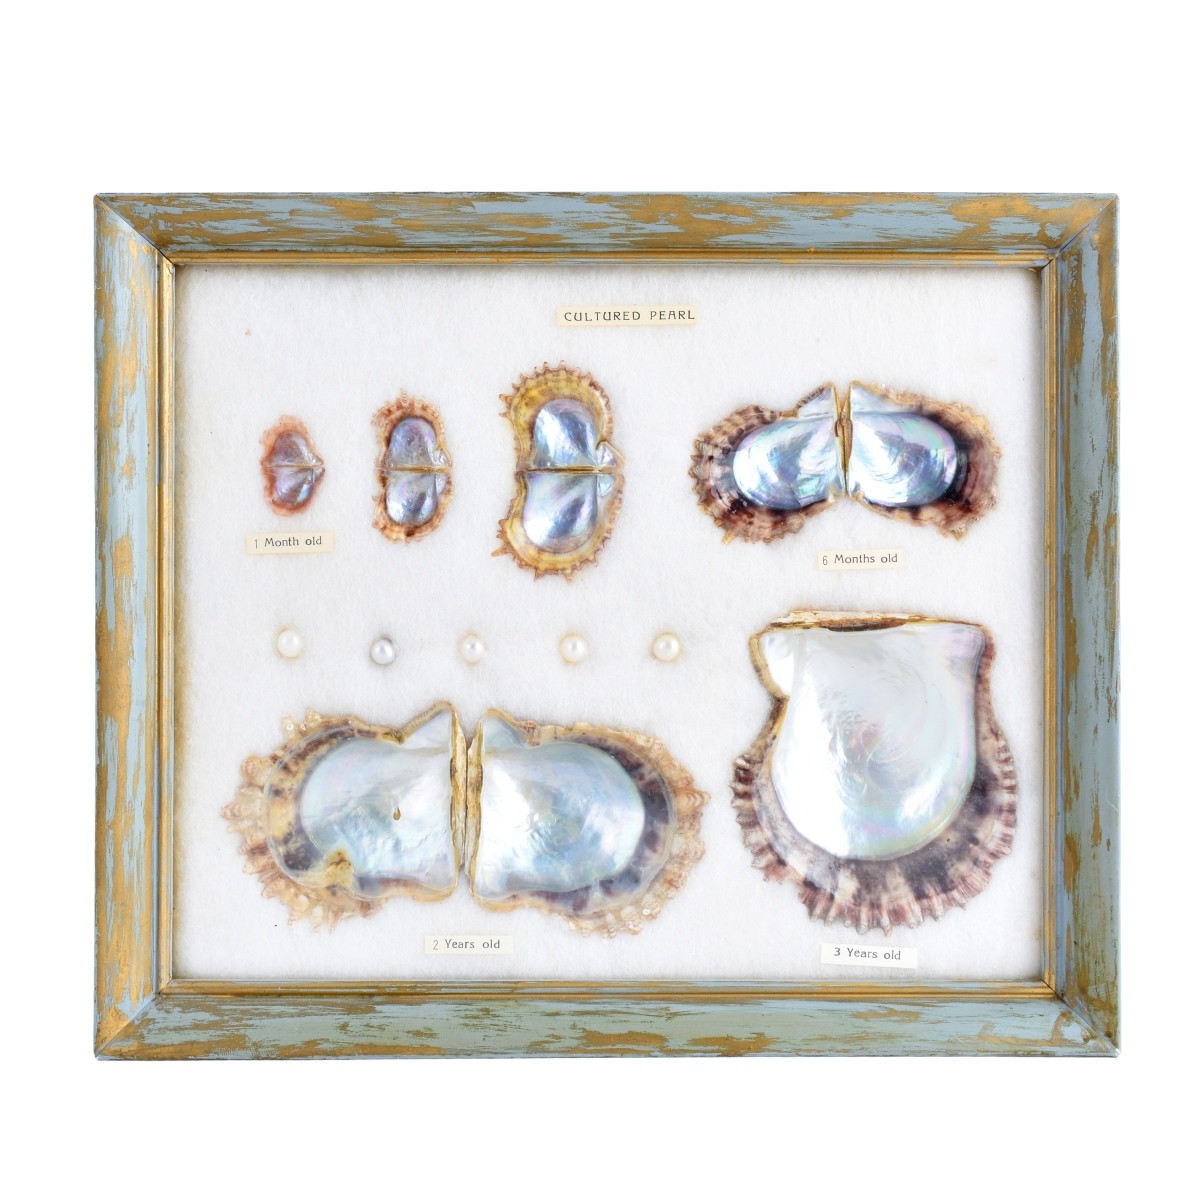 Evolution of the Cultured Pearl in Display